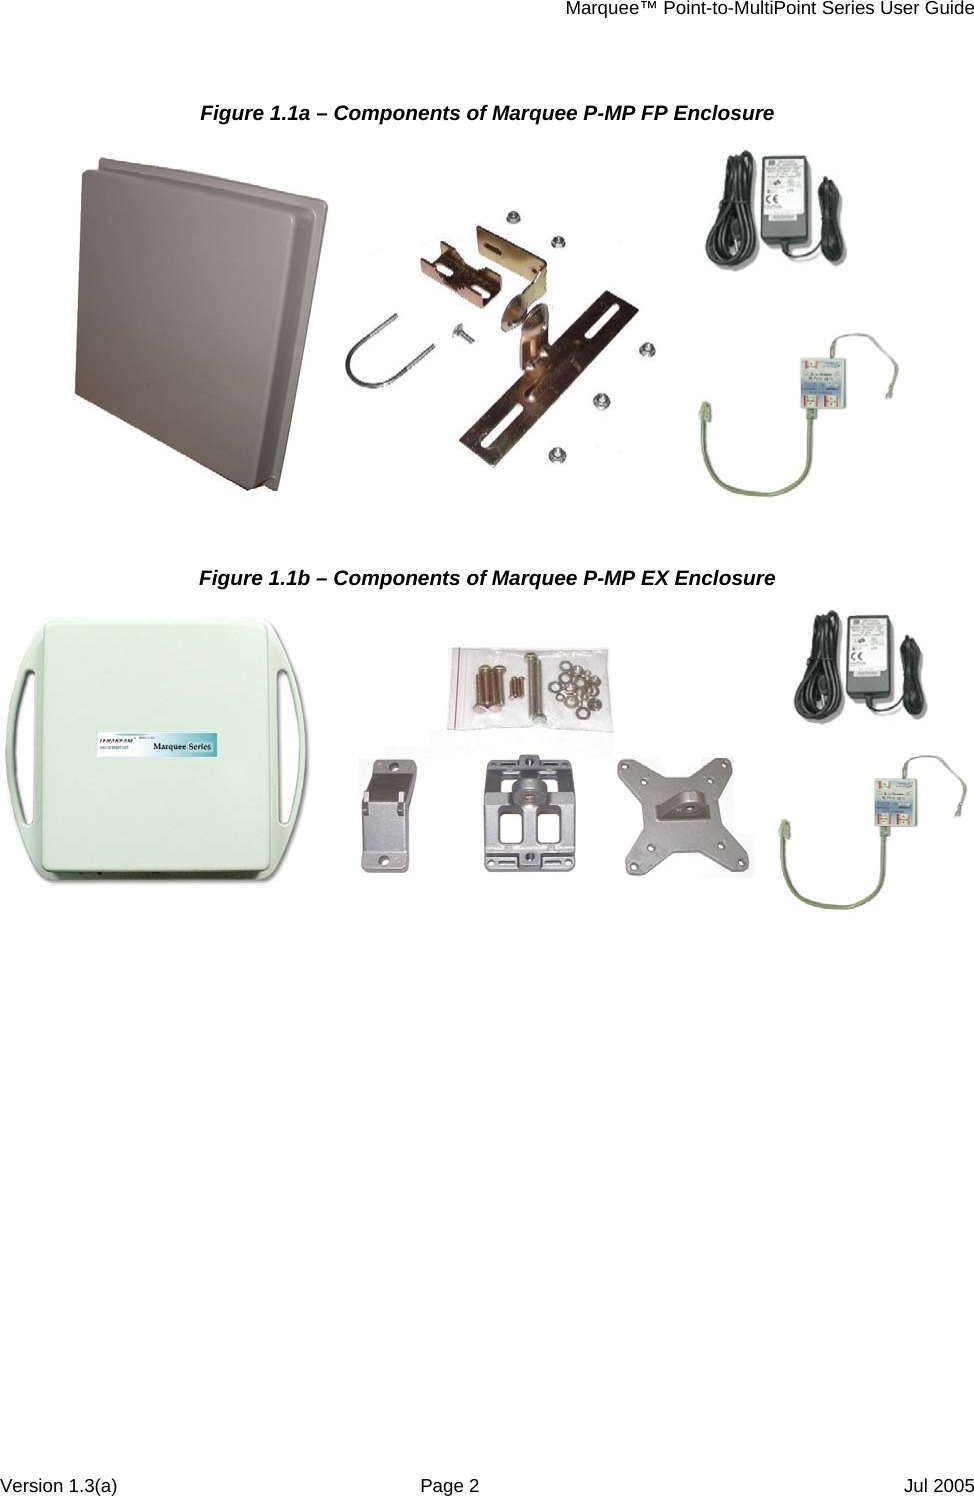     Marquee™ Point-to-MultiPoint Series User Guide Figure 1.1a – Components of Marquee P-MP FP Enclosure   Figure 1.1b – Components of Marquee P-MP EX Enclosure   Version 1.3(a)  Page 2  Jul 2005 